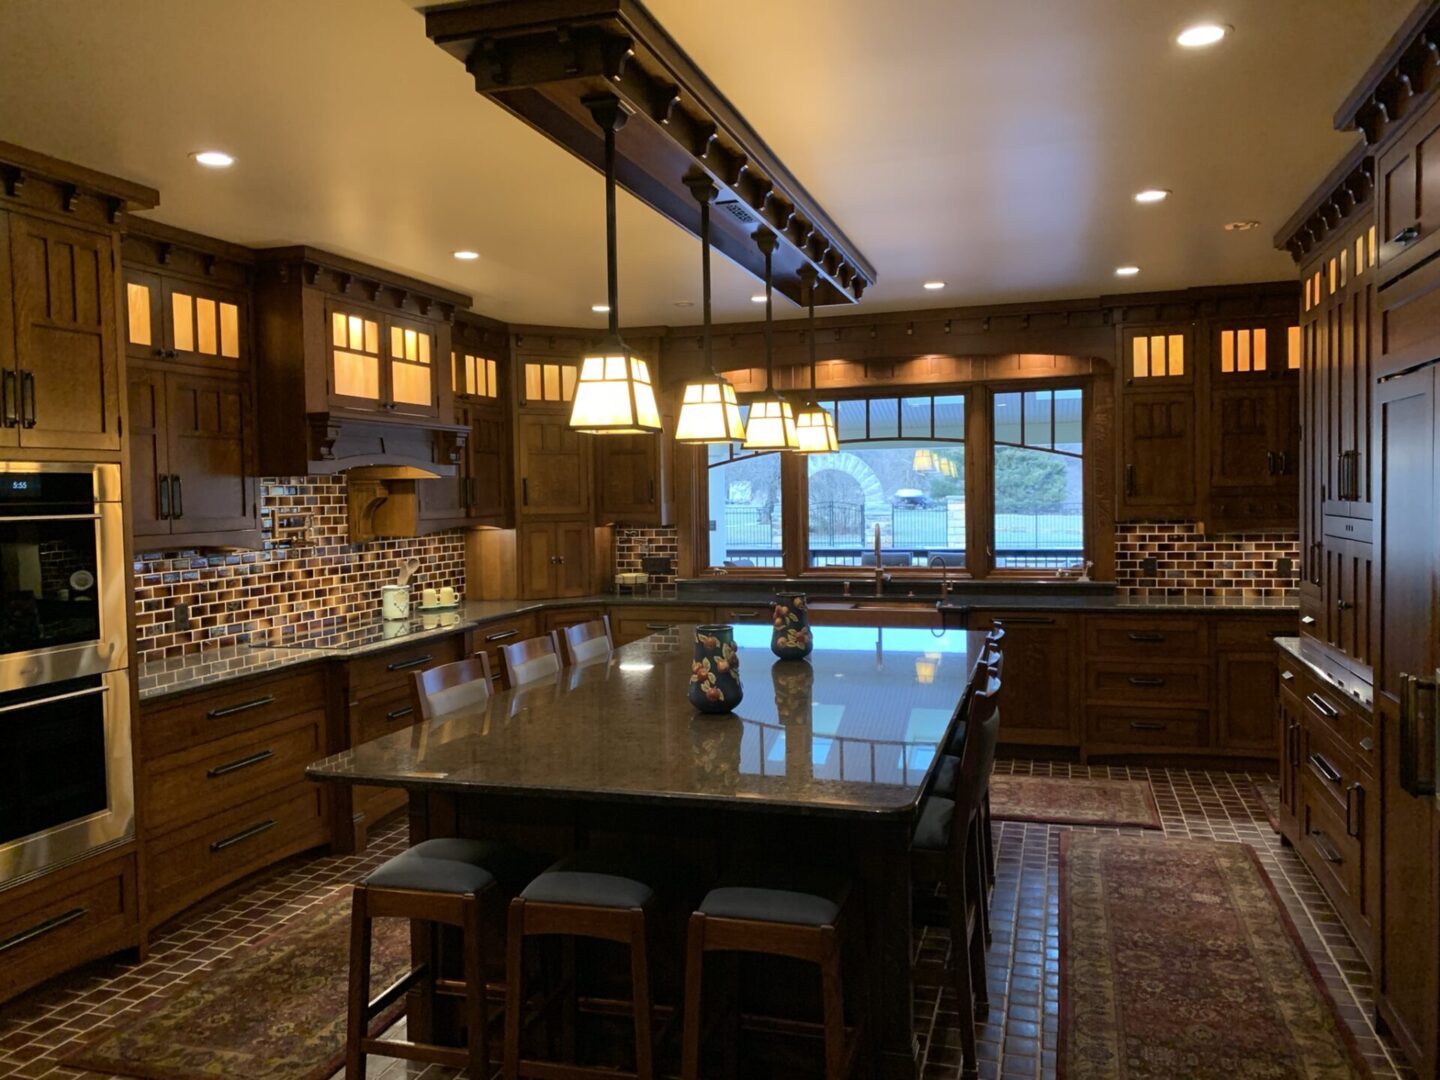 A kitchen with a huge dining table